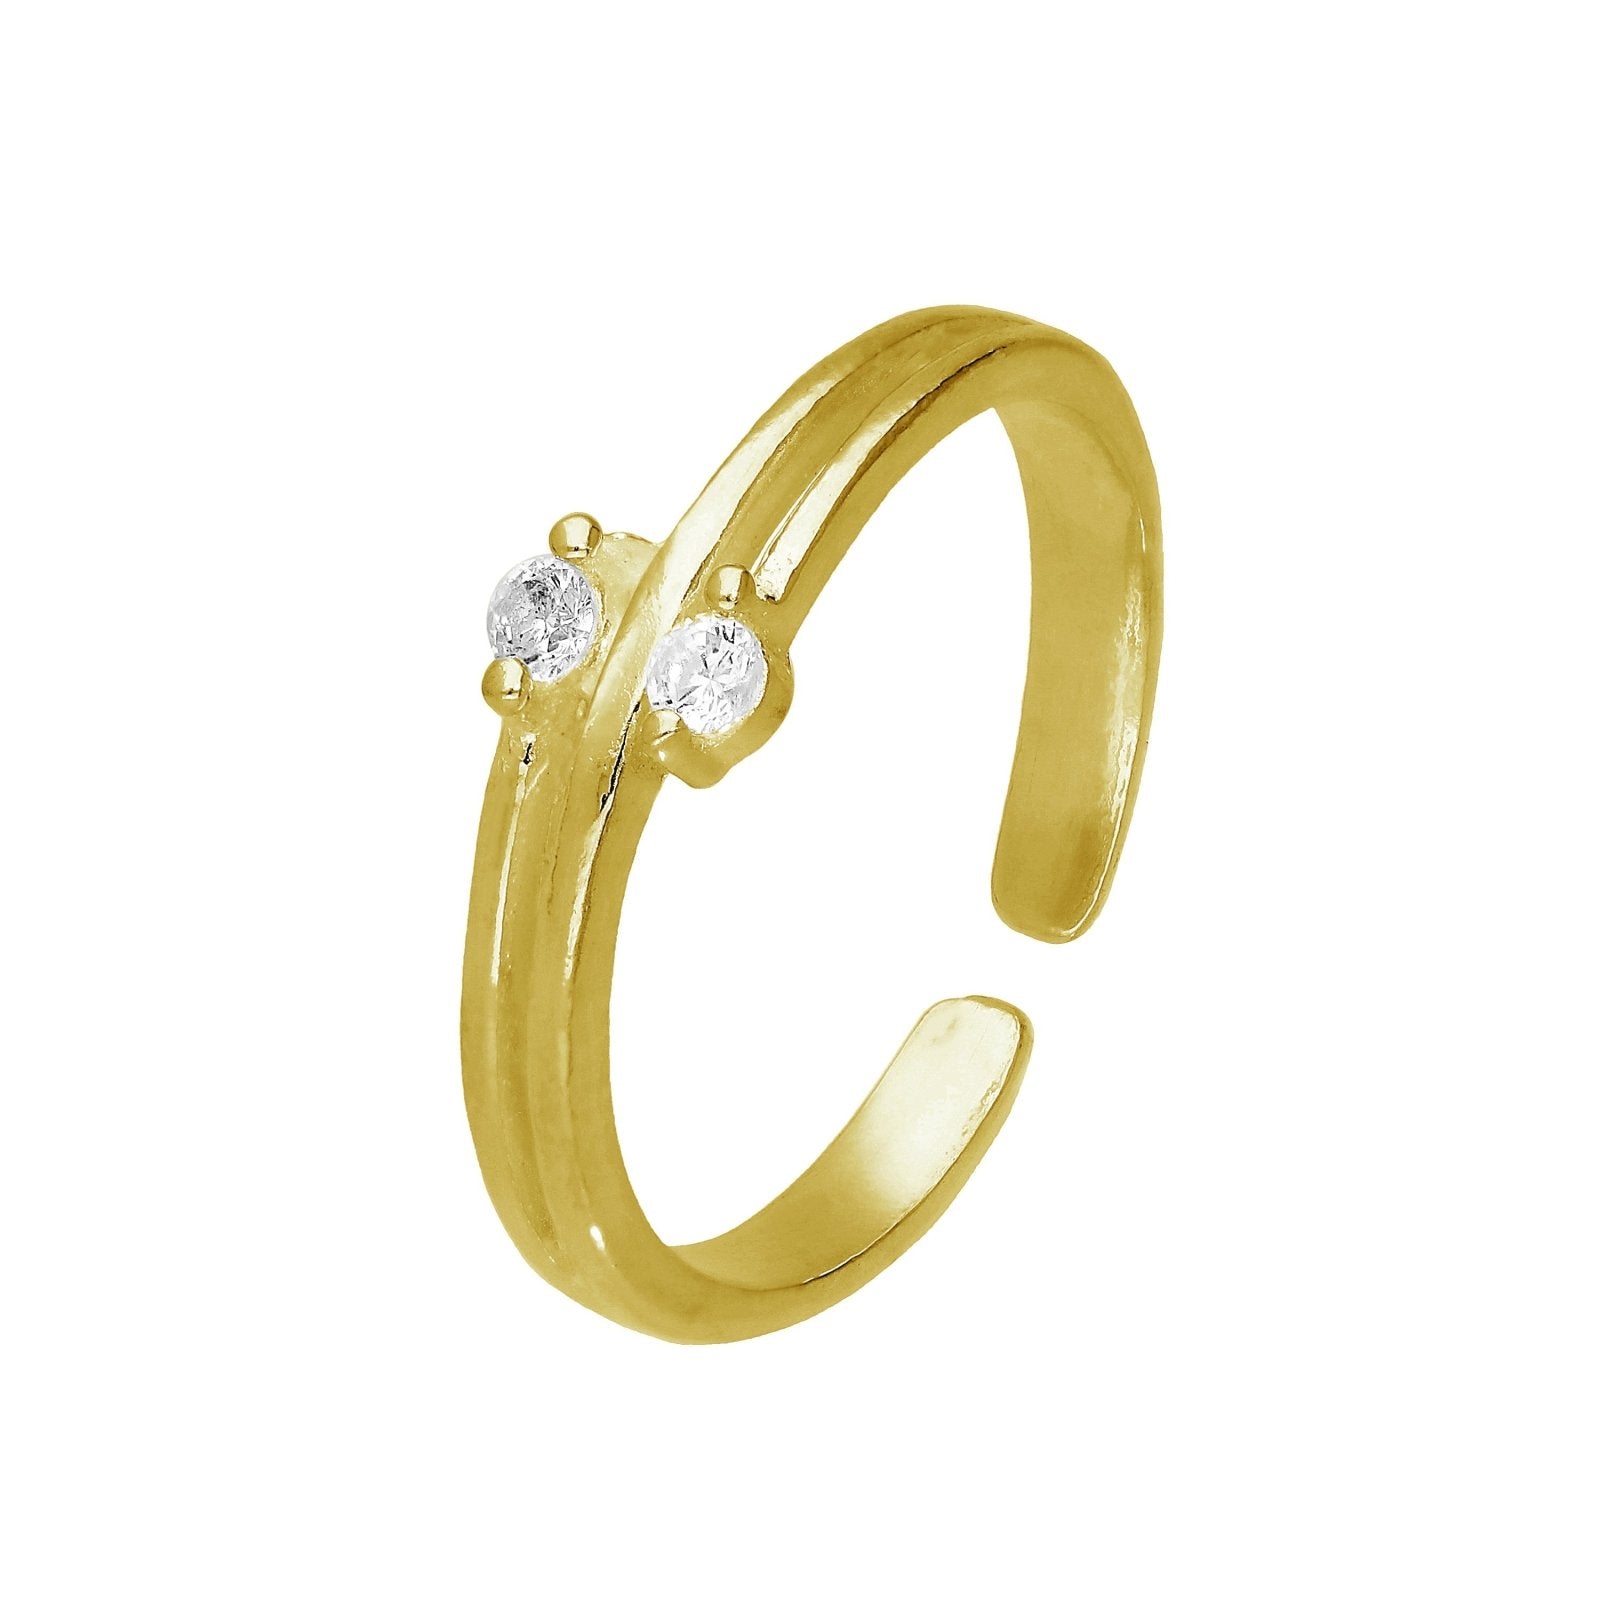 Gold Plated Sterling Silver & Double CZ Adjustable Toe Ring - jewellerybox